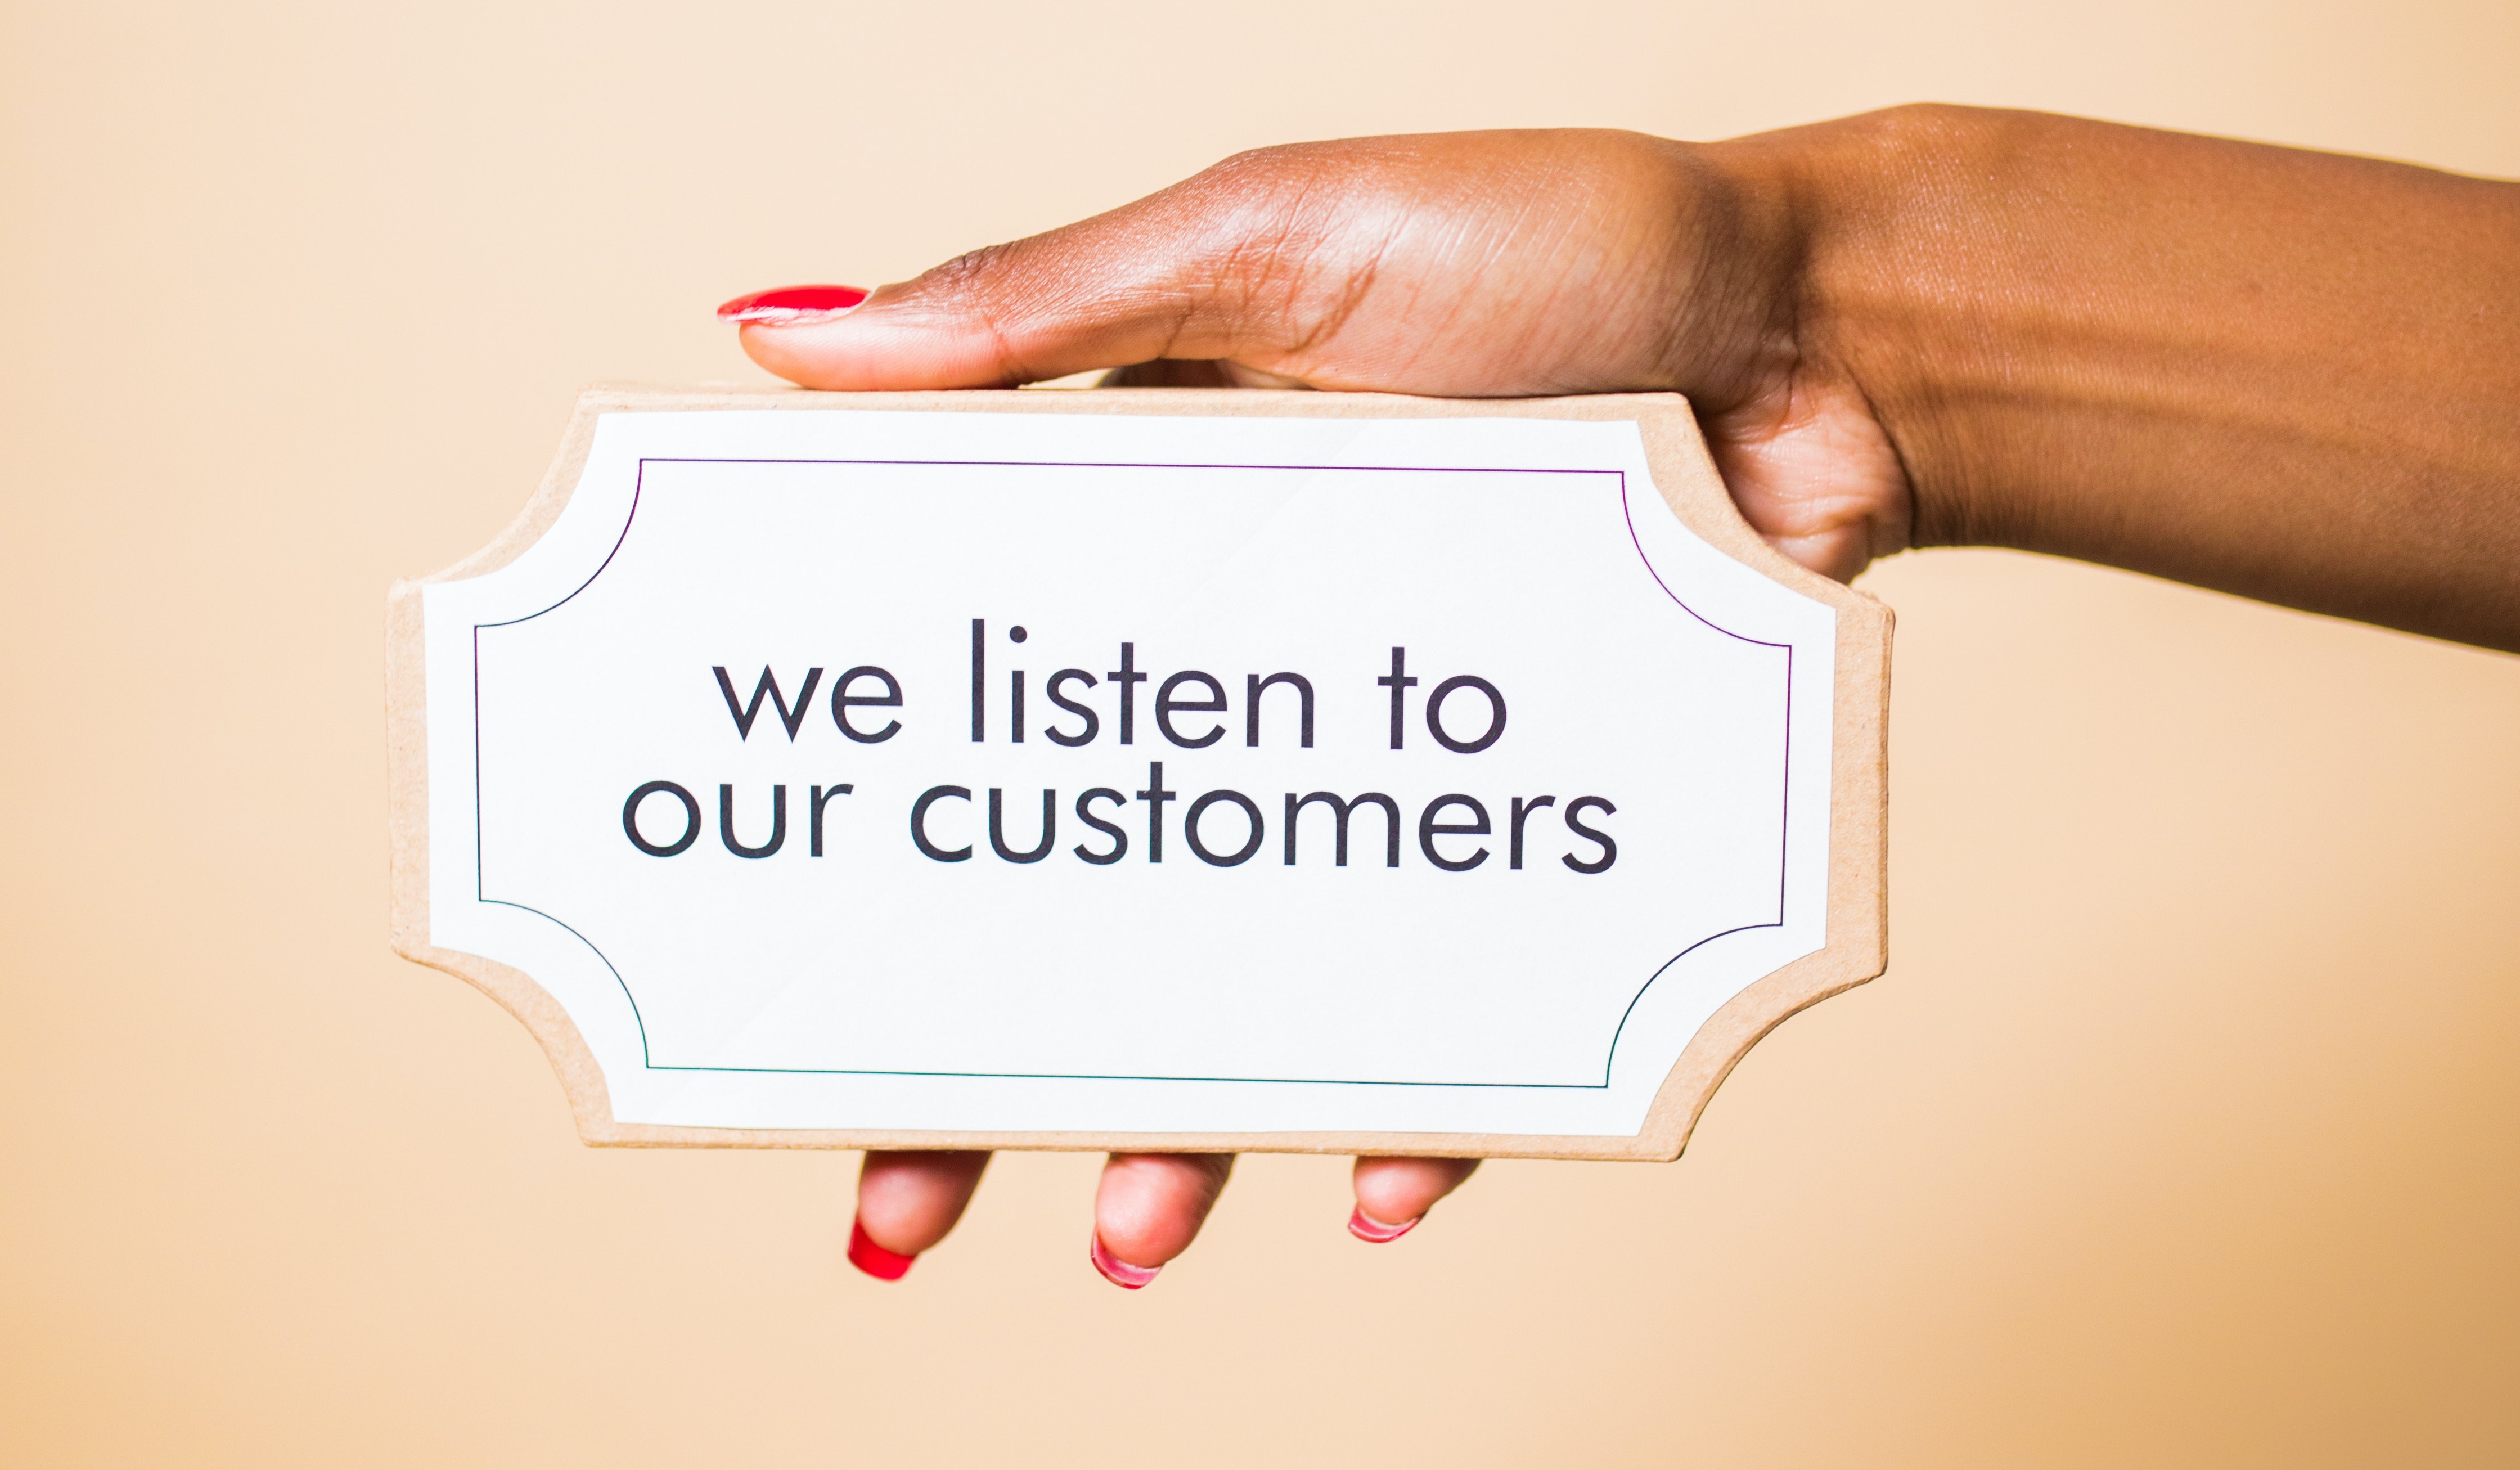 7 Ways to Use Social Listening for Customer Service